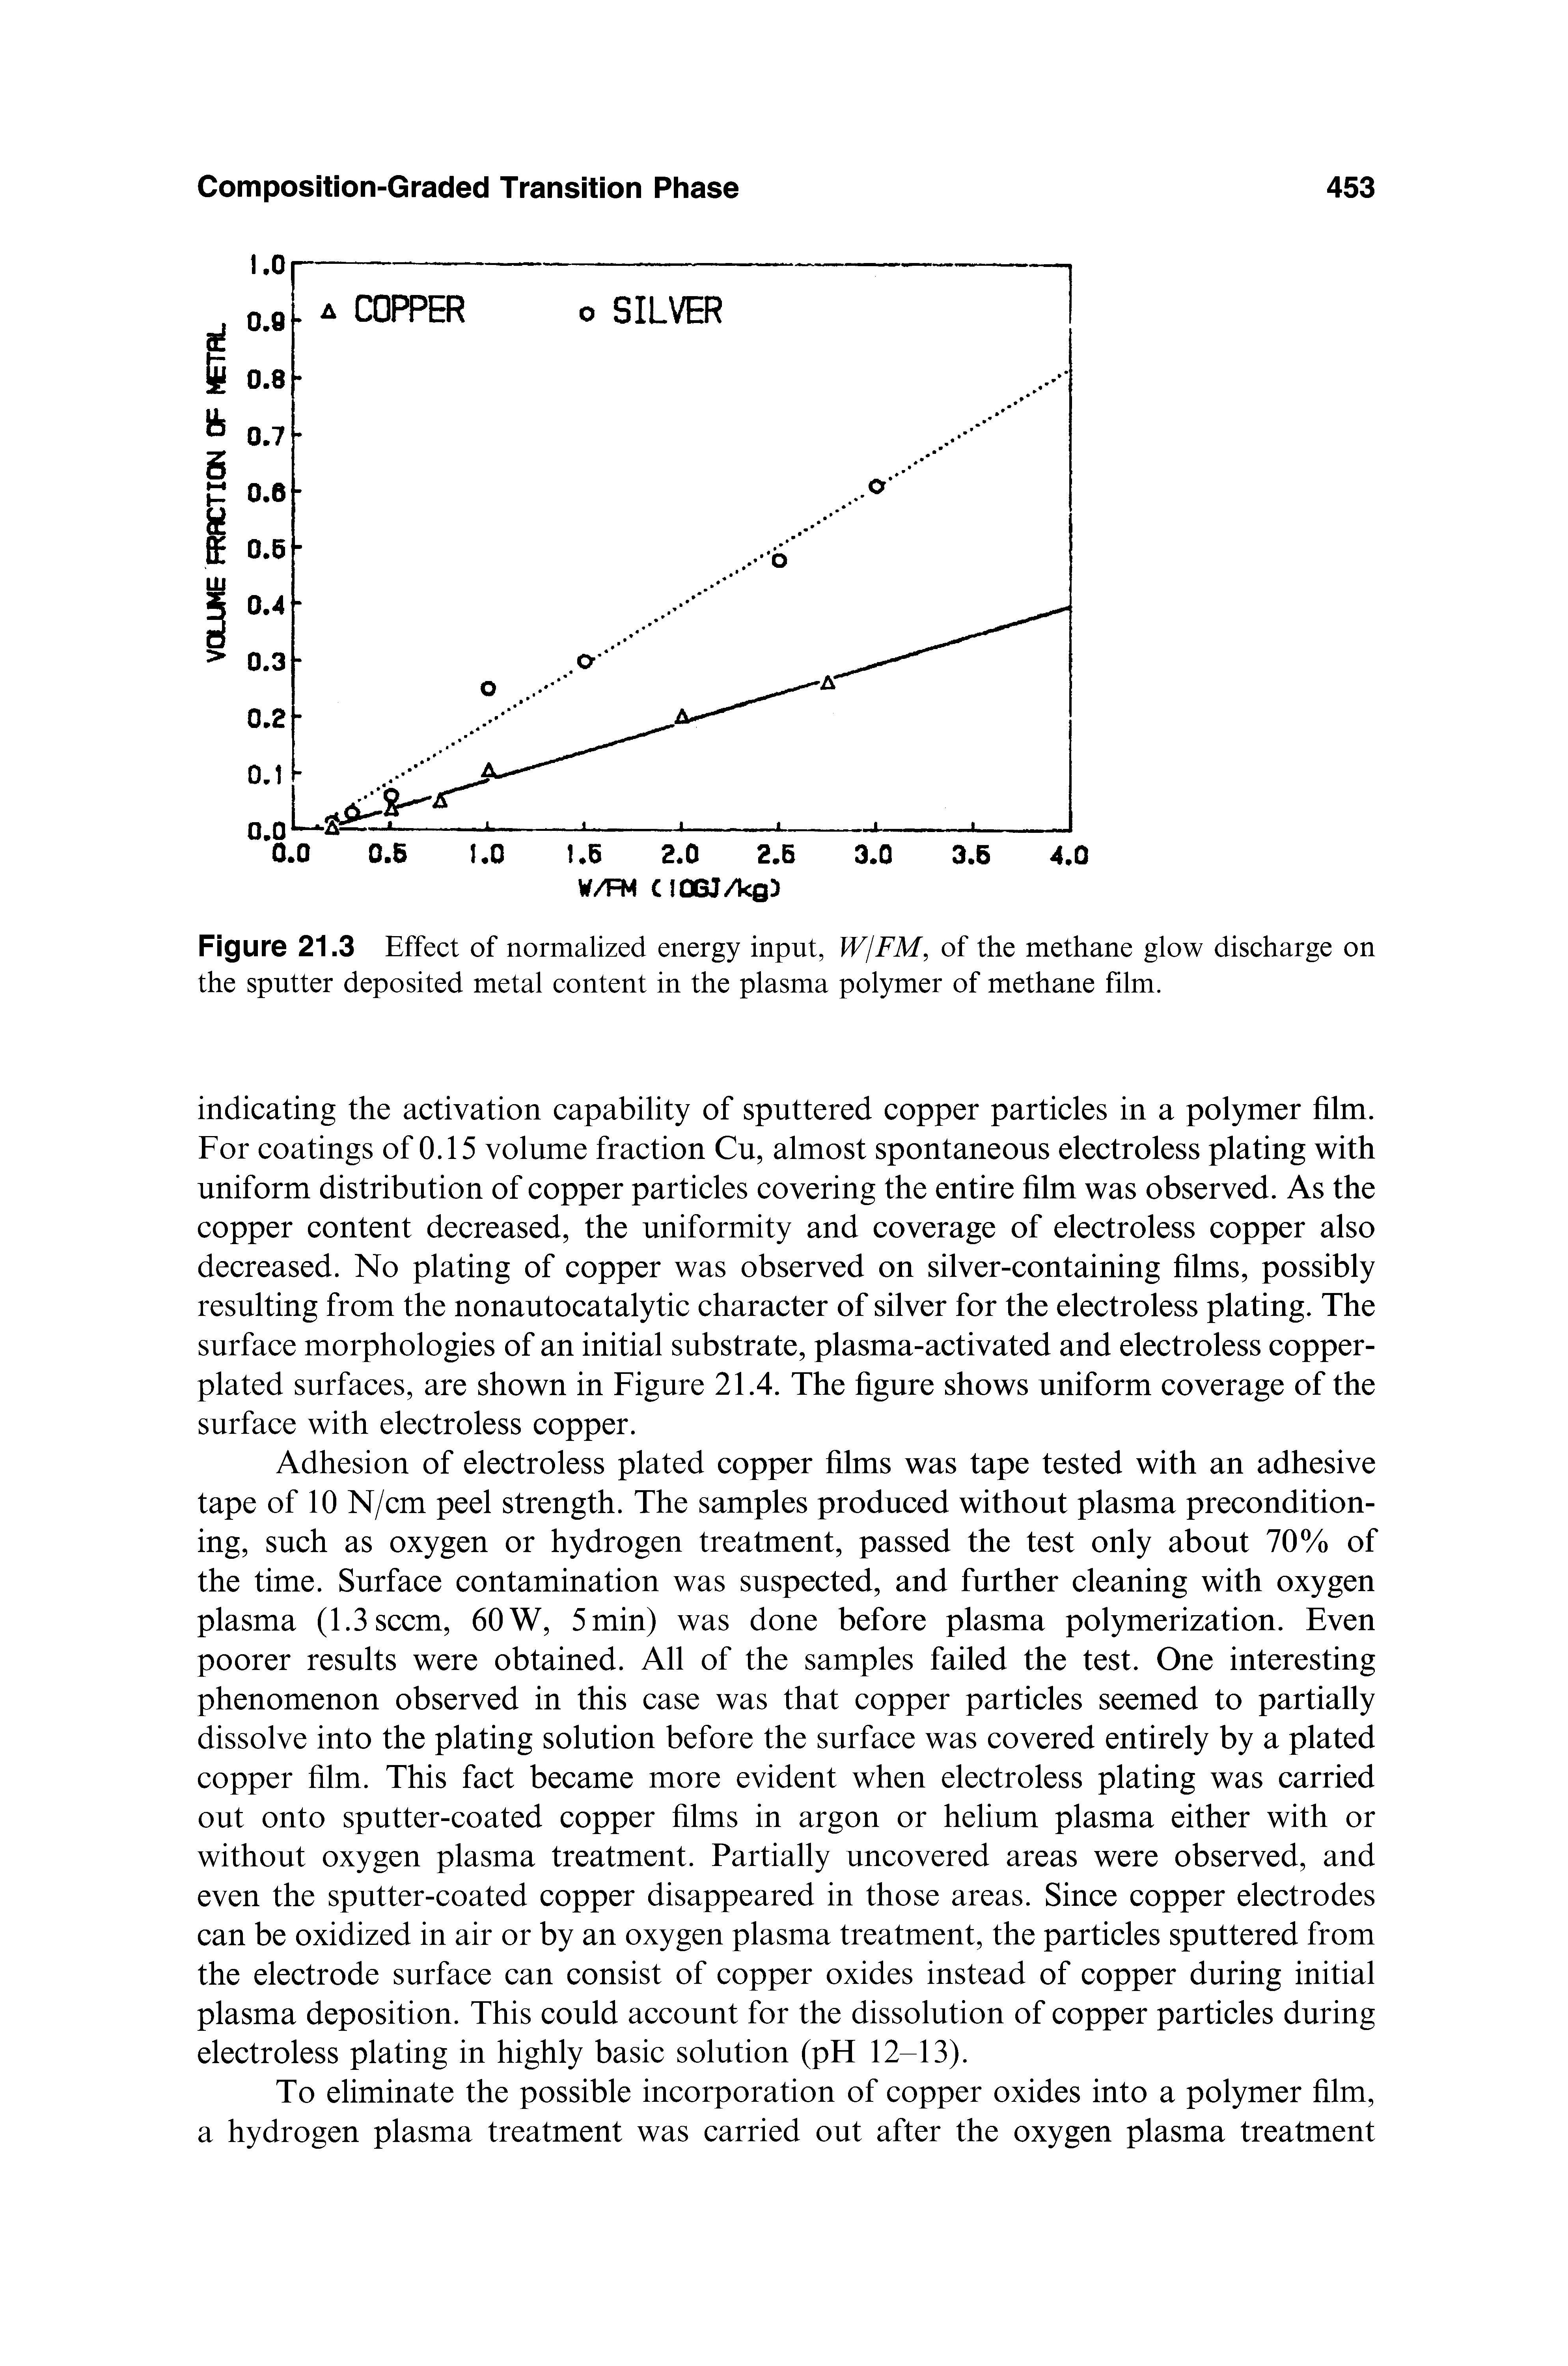 Figure 21.3 Effect of normalized energy input, WjFM, of the methane glow discharge on the sputter deposited metal content in the plasma polymer of methane film.